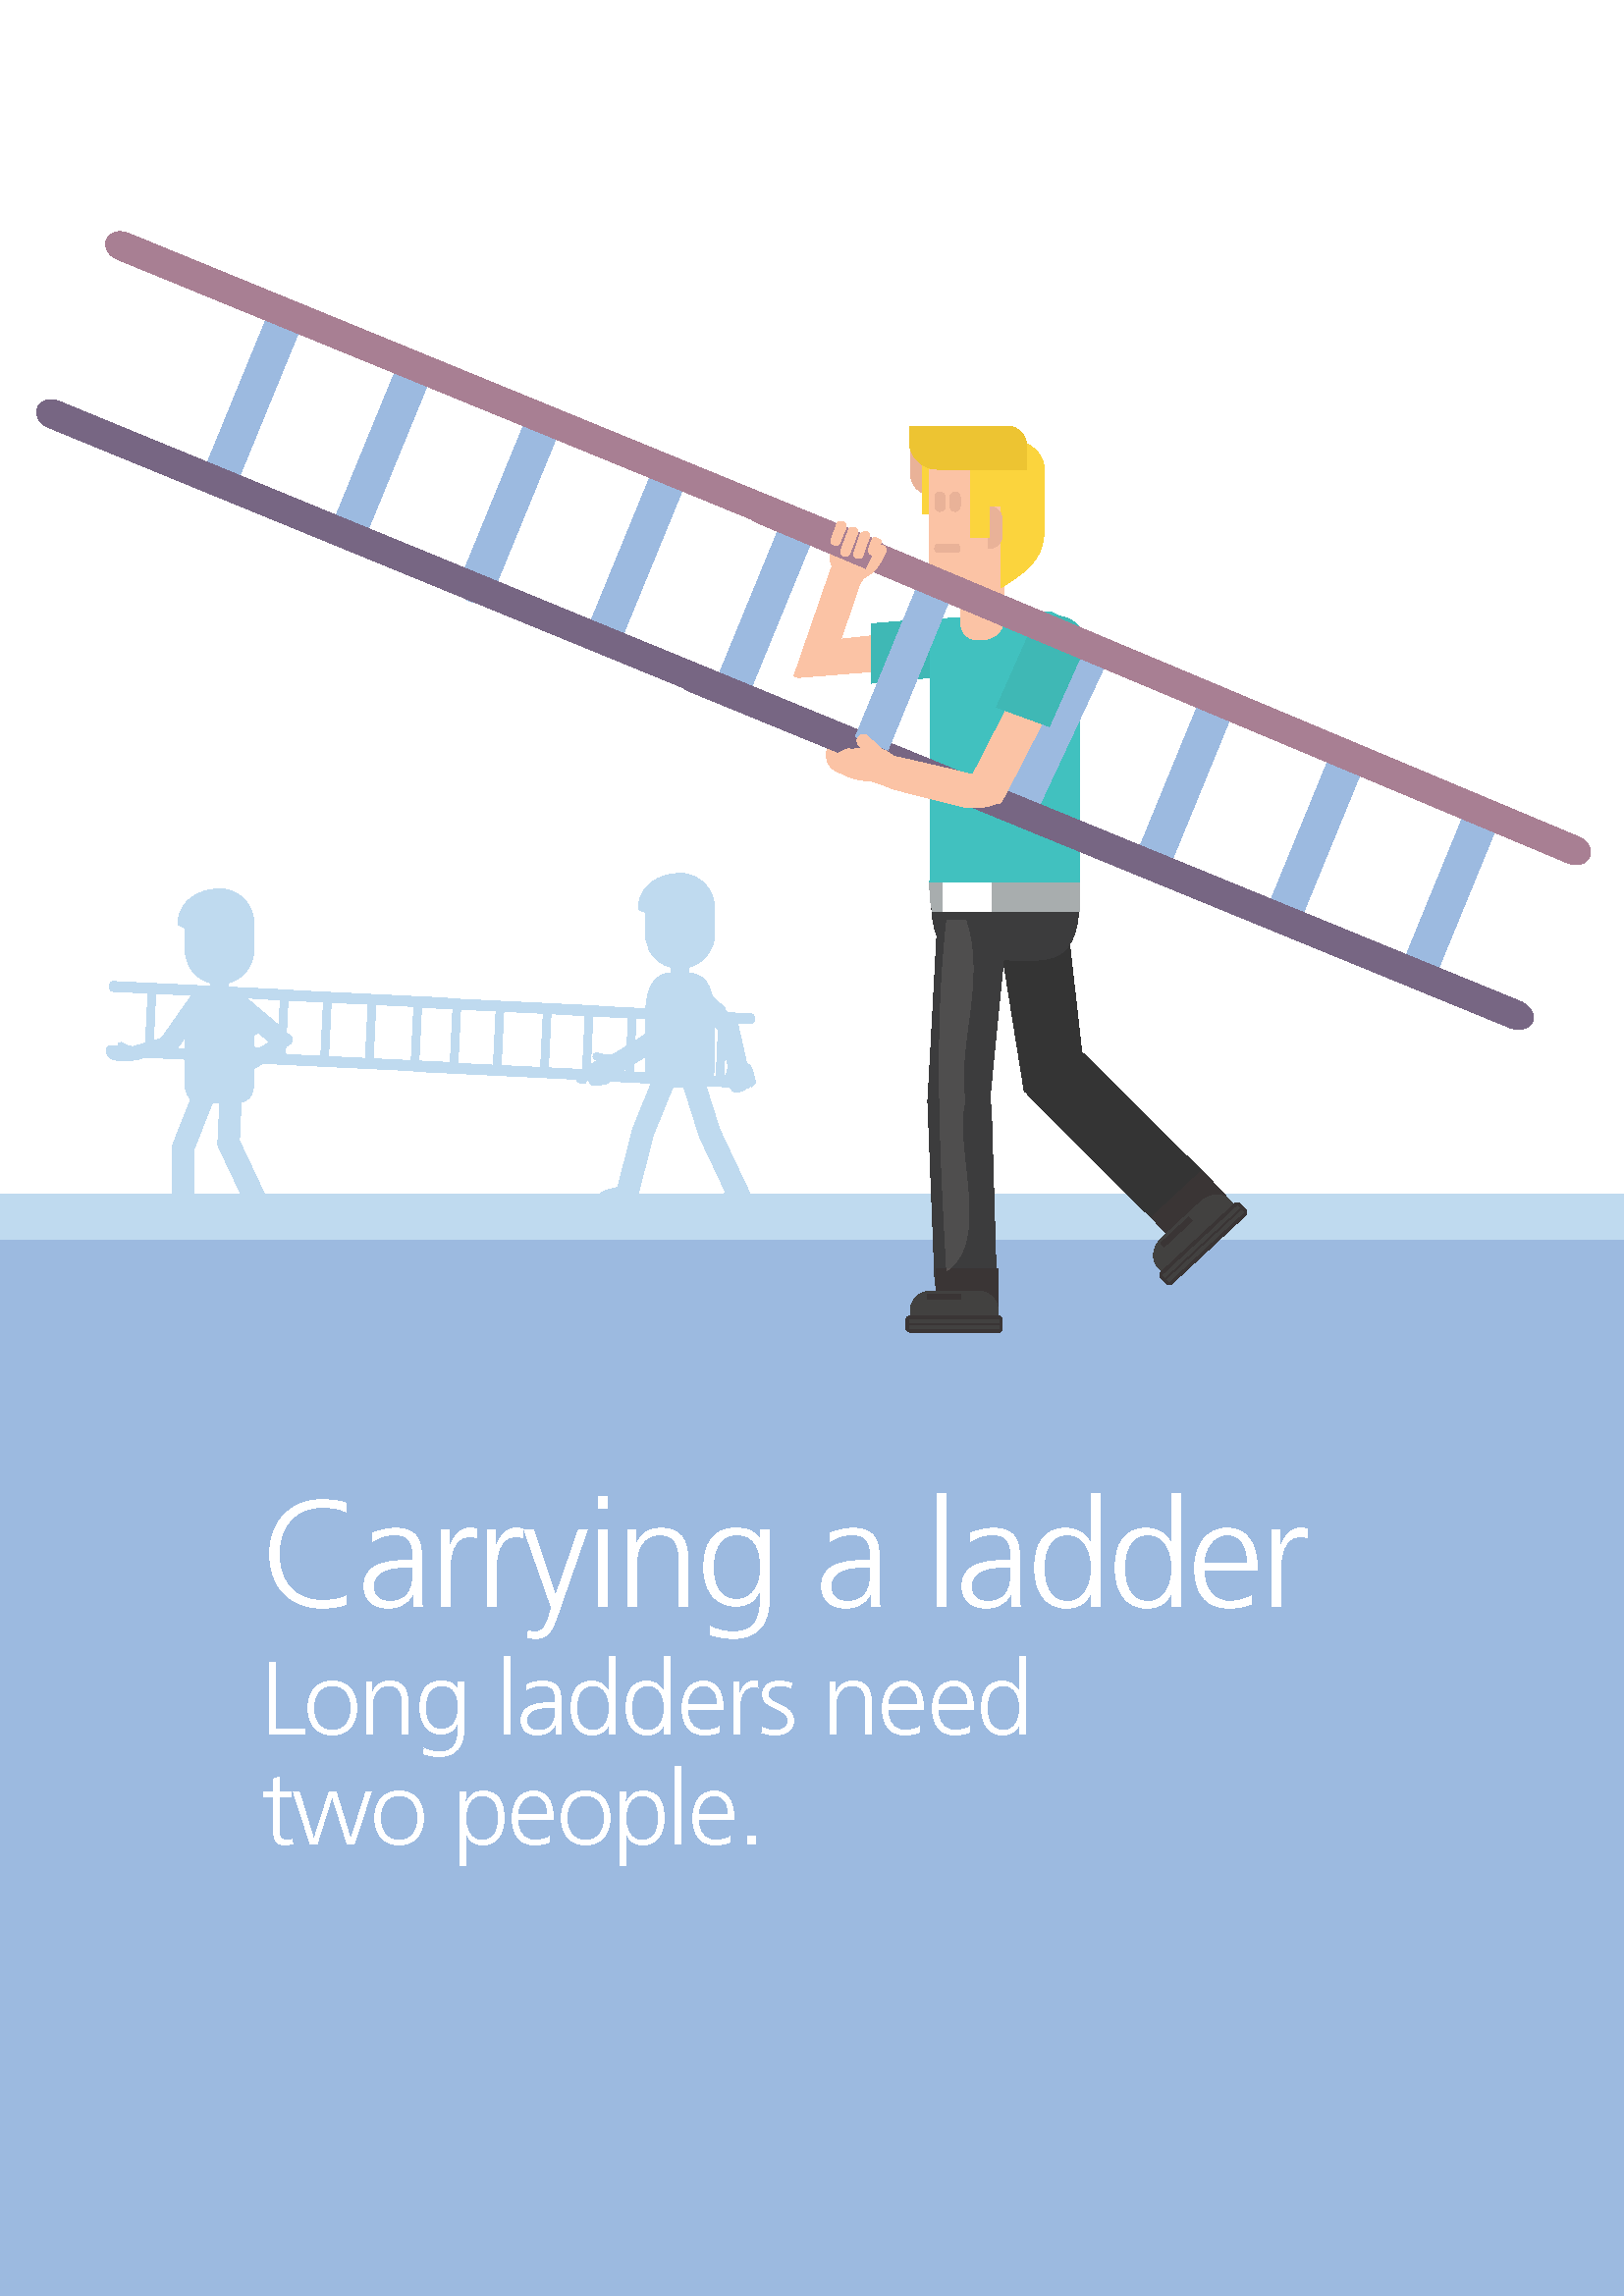 Carrying a long ladder requires two people